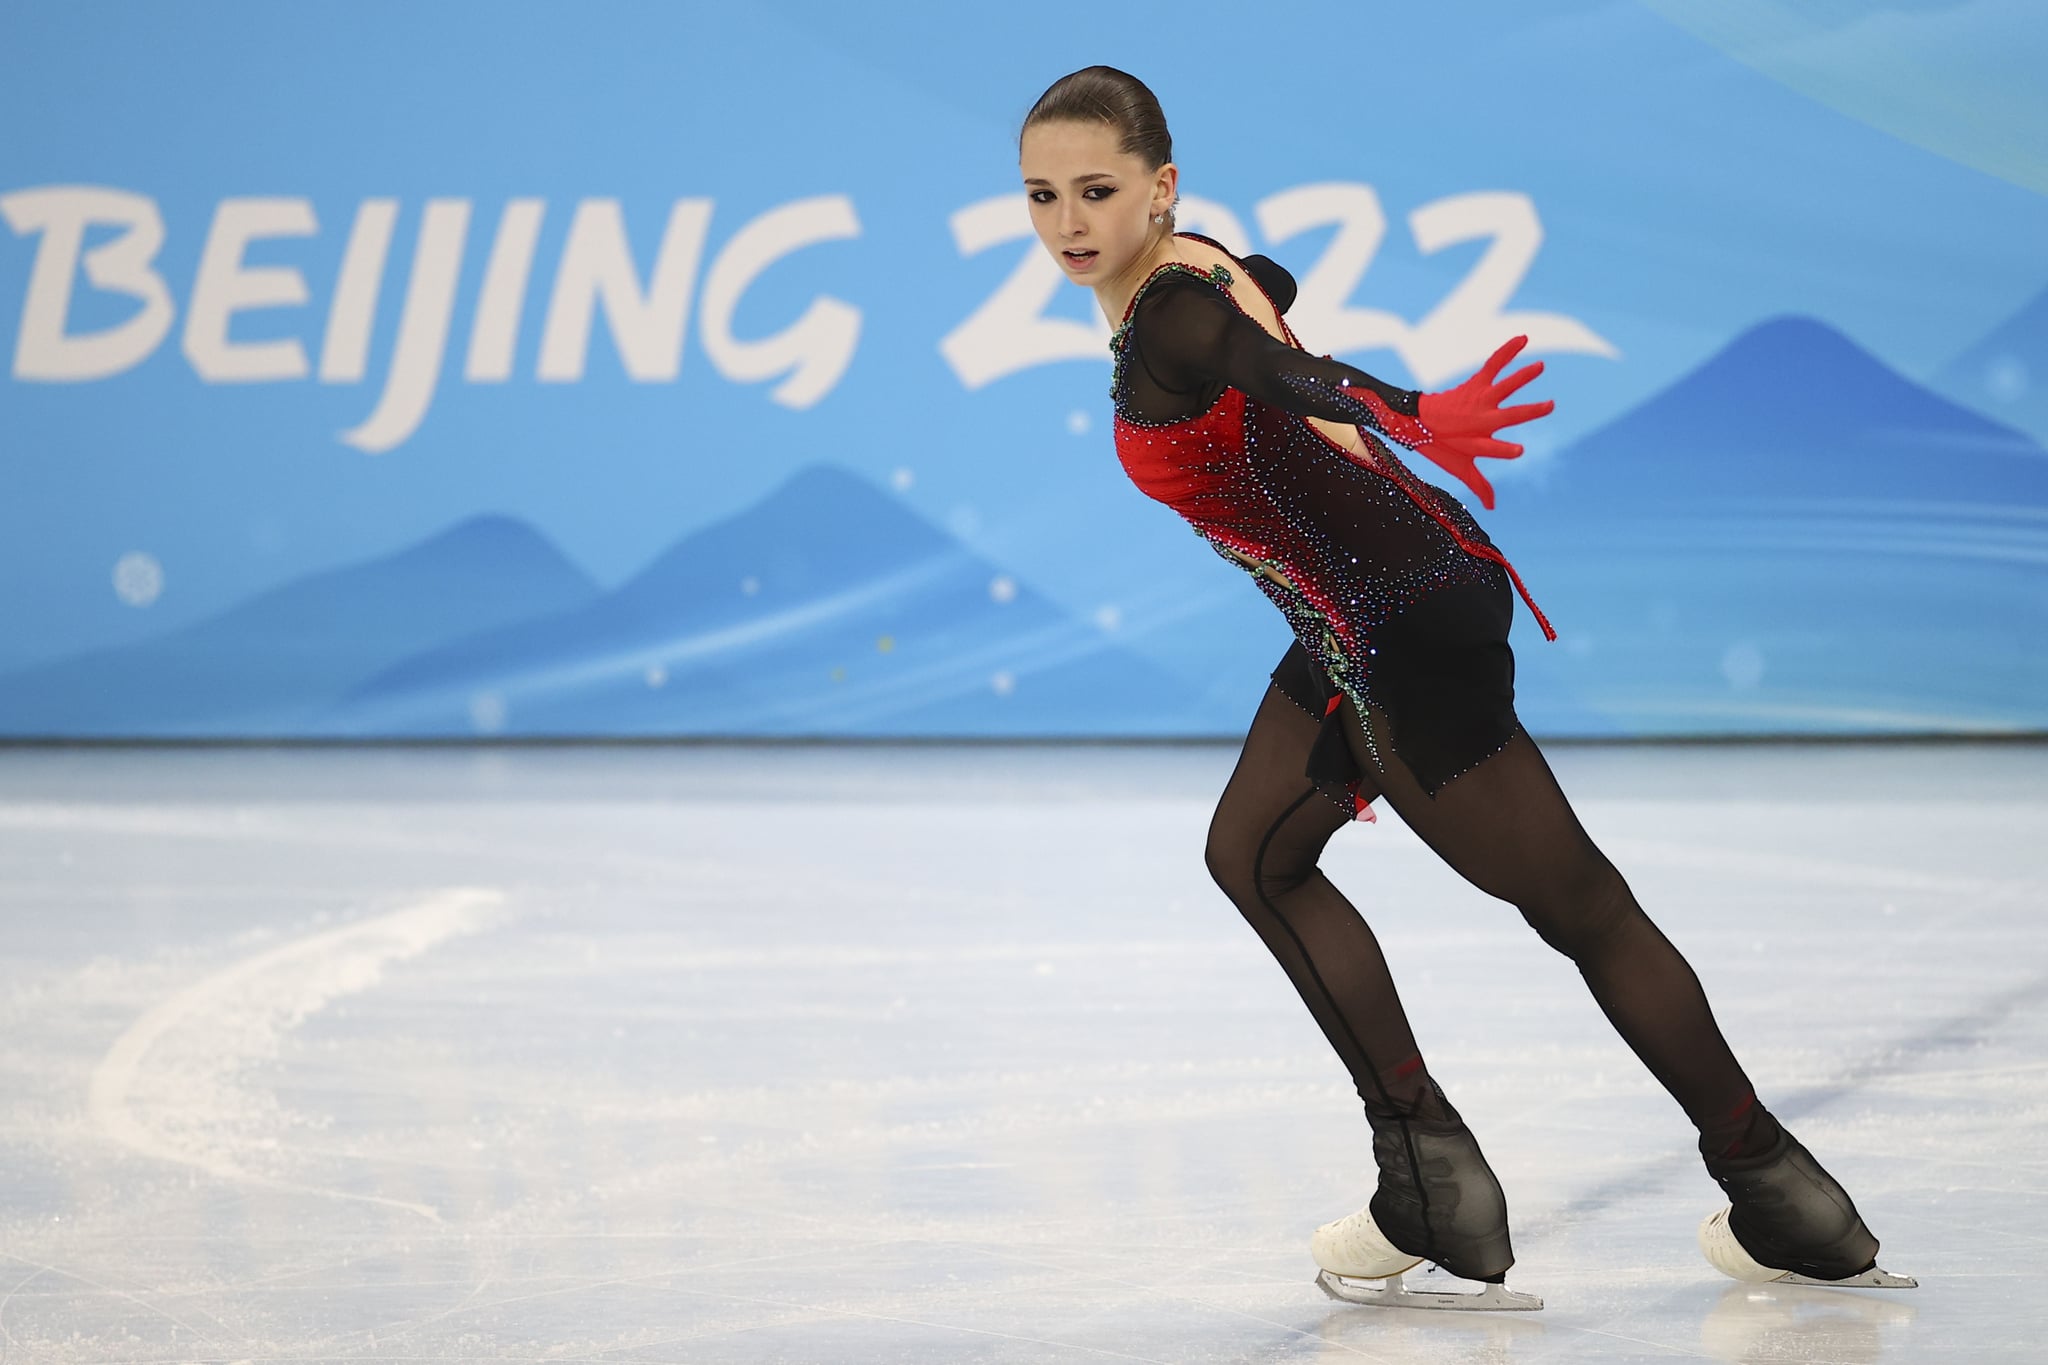 Kamila Valieva competes at the 2022 Winter Olympics figure skating team event in Beijing.